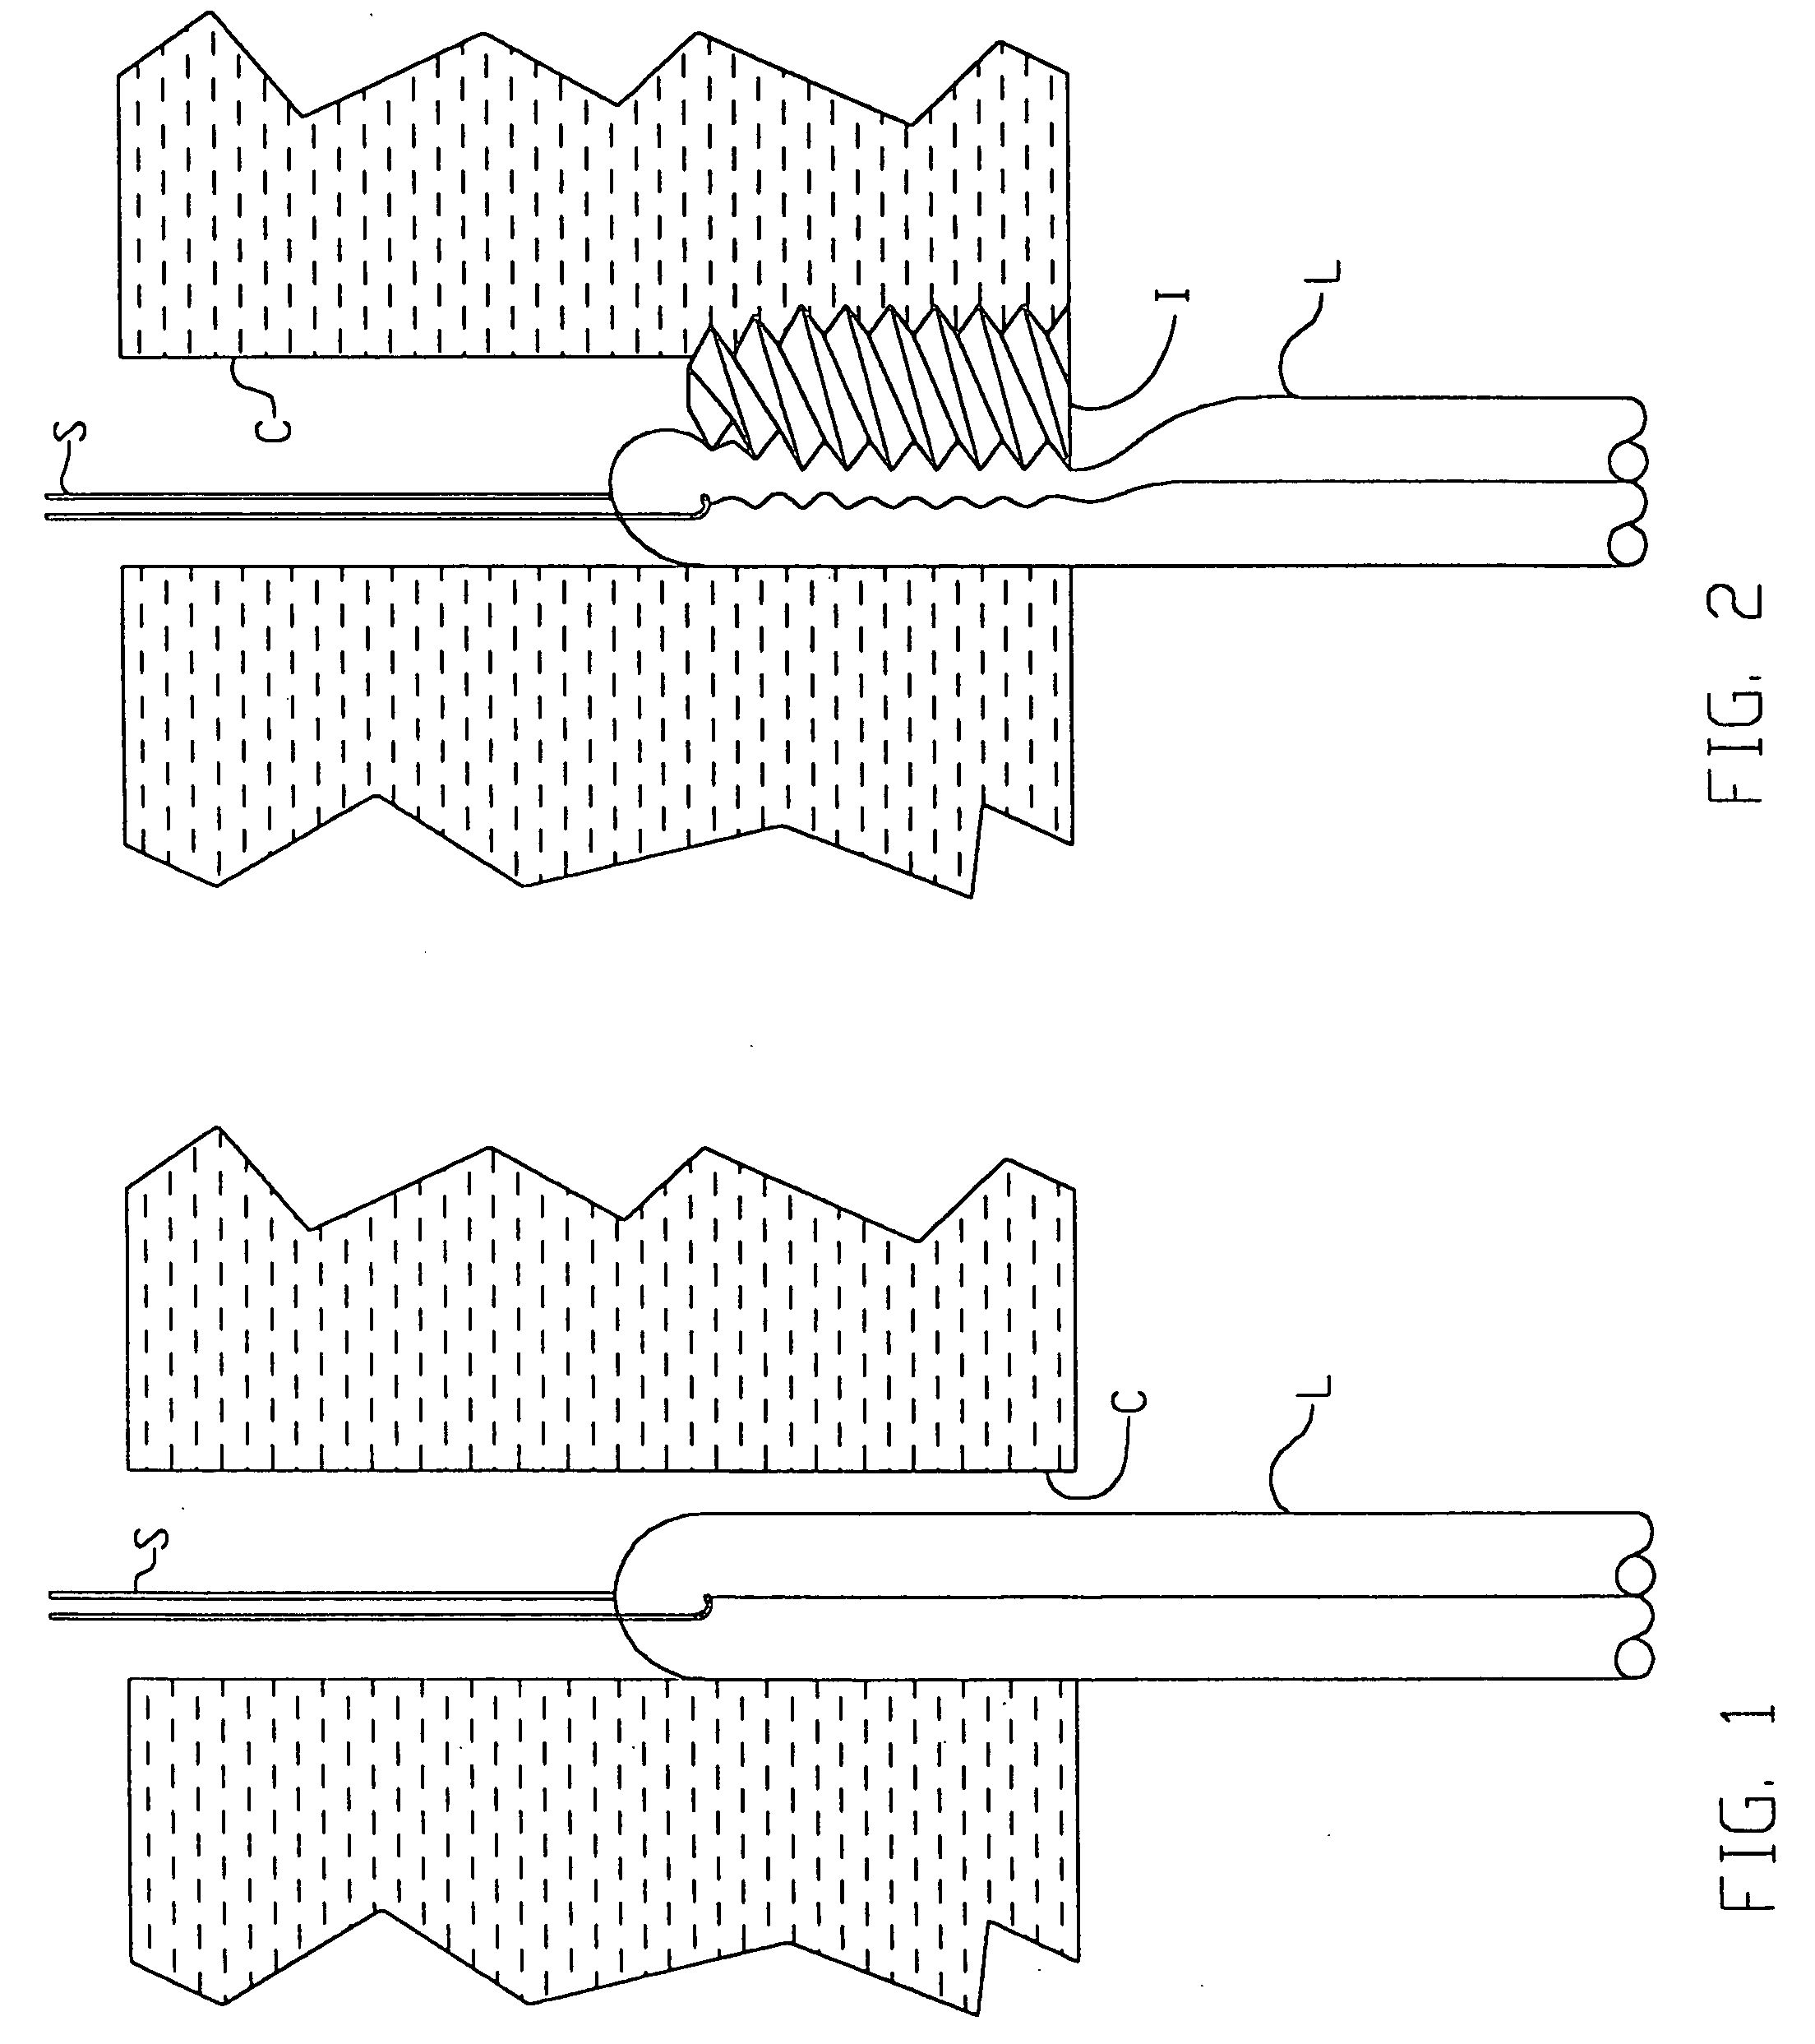 Apparatus and method for ligament fixation